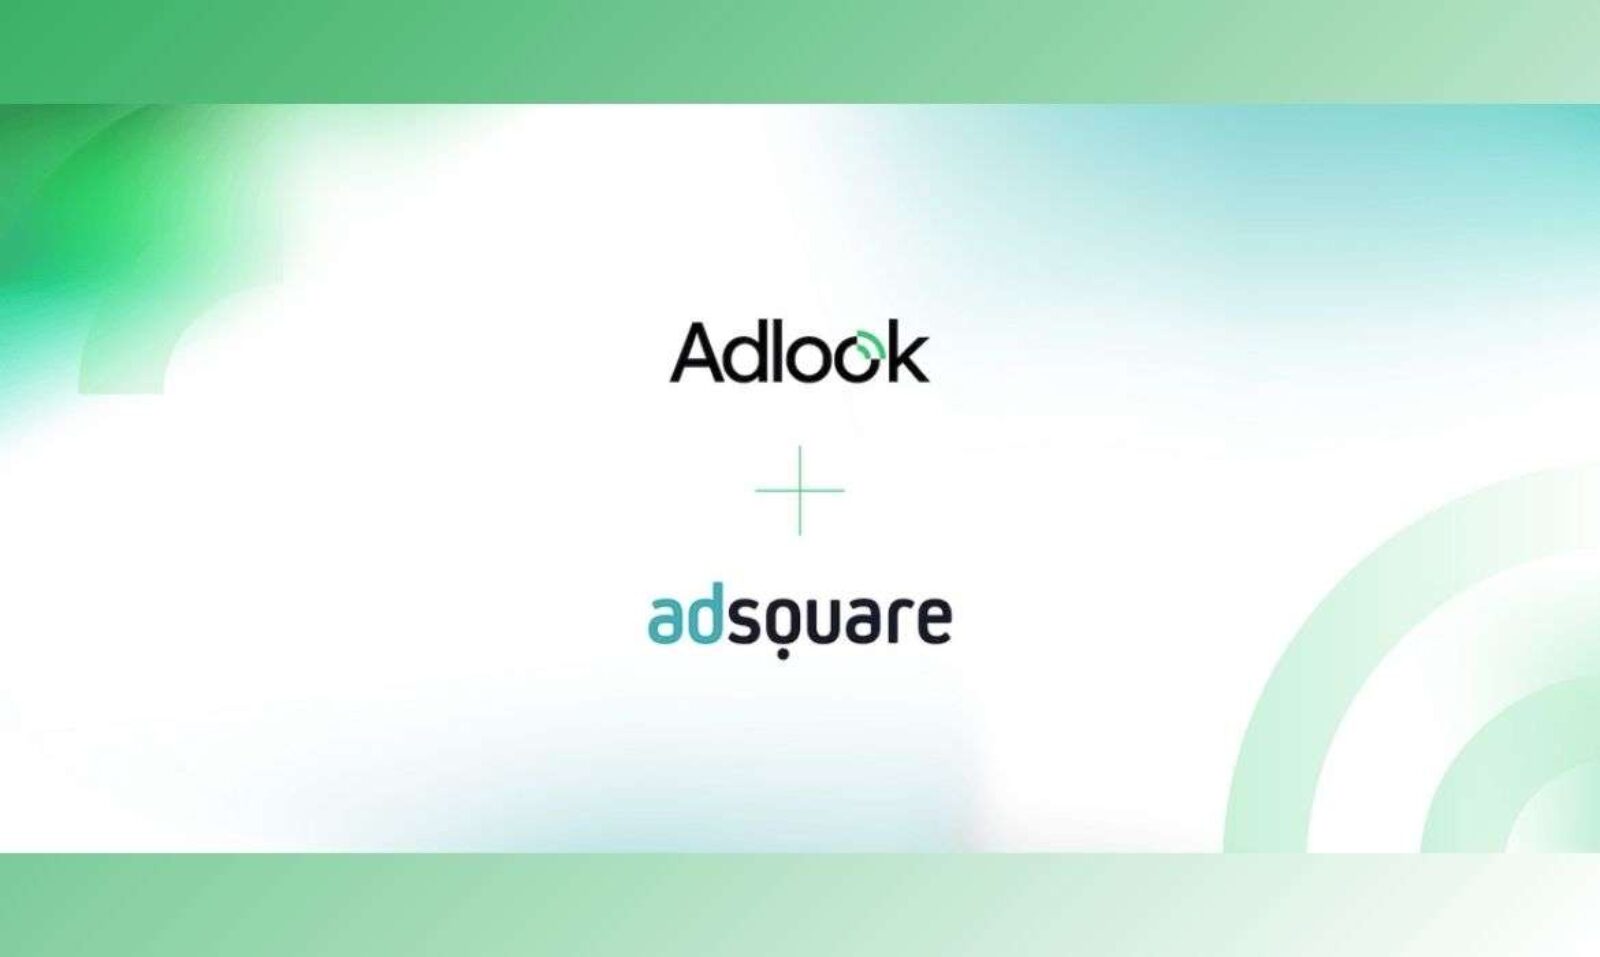 Adlook, Adsquare, data collection, location data, location data collection, location intelligence platform, advertisers, marketers, marketing, open web, multichannel campaigns, programmatic, campaign planning, cutting edge technology, customer behaviour, clients, sustainabaility, media technology, media performance, ad waste, Deep Learning, privacy-first, brand growth, next-generation brand growth, future proof, customer privacy, data privacy, privacy safe targeting, cookie-less, geo-contextual audience, cookie-less targeting, location-based targeting